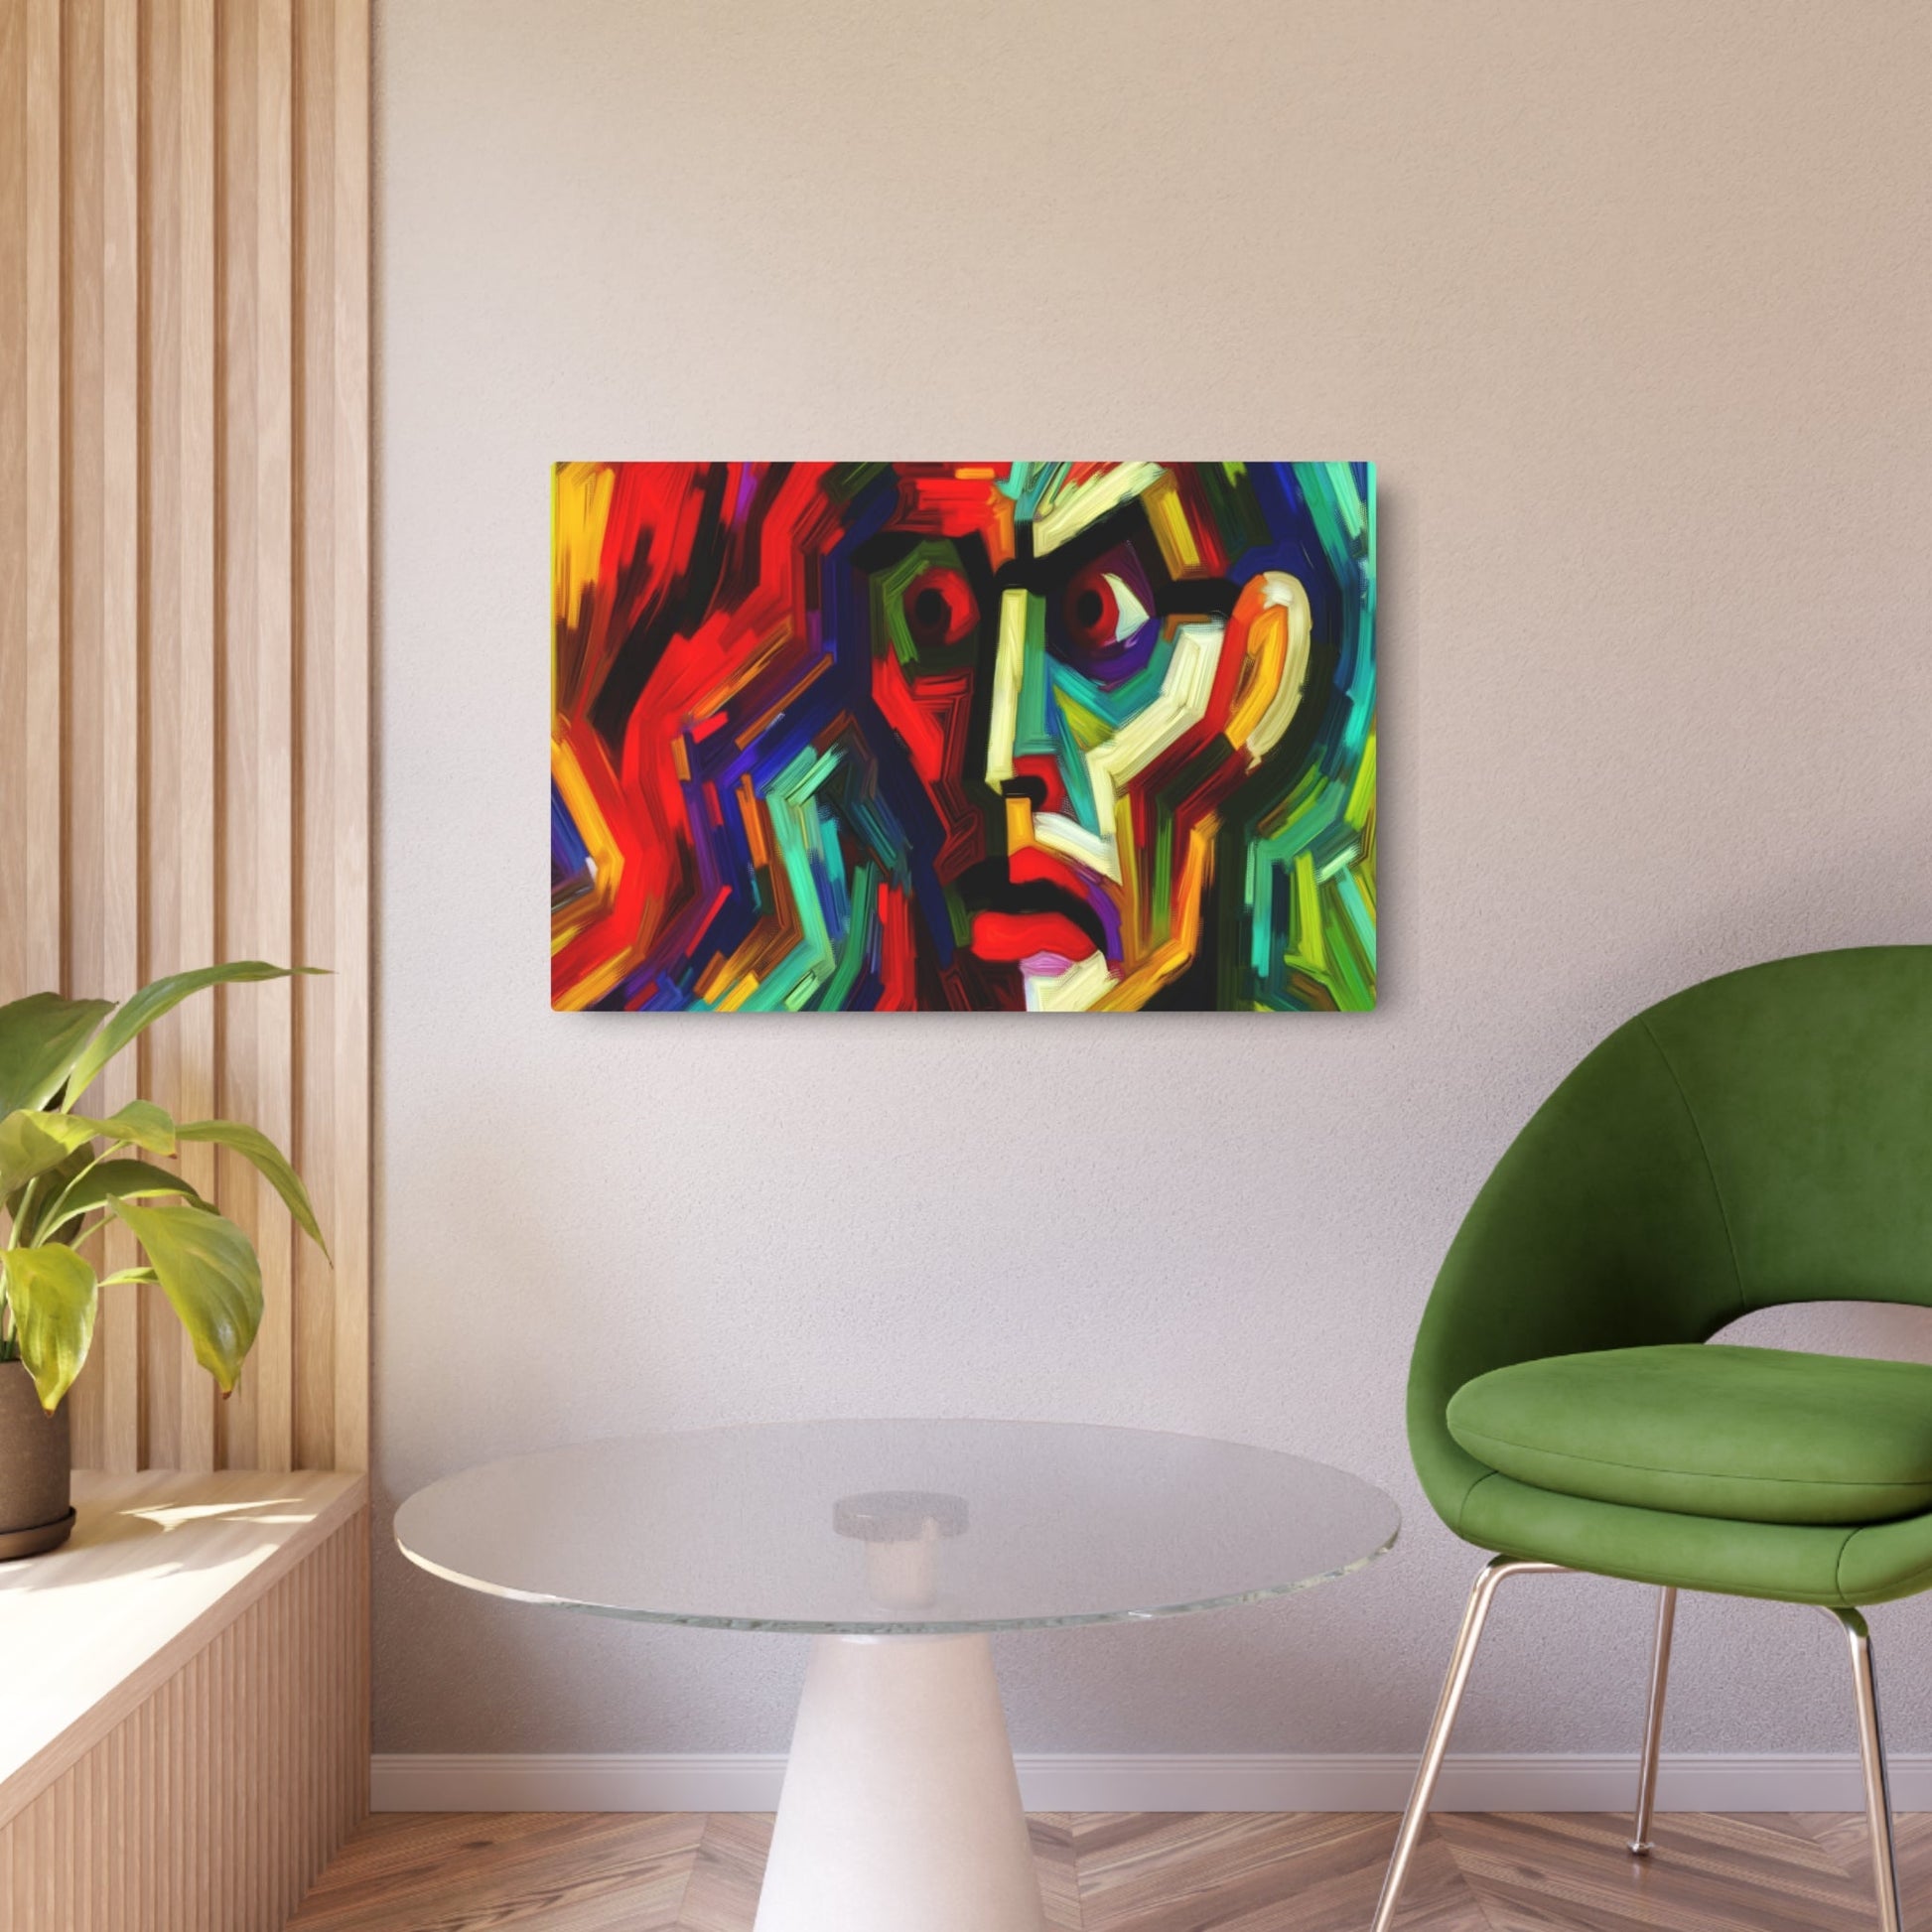 Metal Poster Art | "Expressionism Inspired Art Image - Emotional and Psychological Intensity Reflected in Western Art Styles" - Metal Poster Art 36″ x 24″ (Horizontal) 0.12''